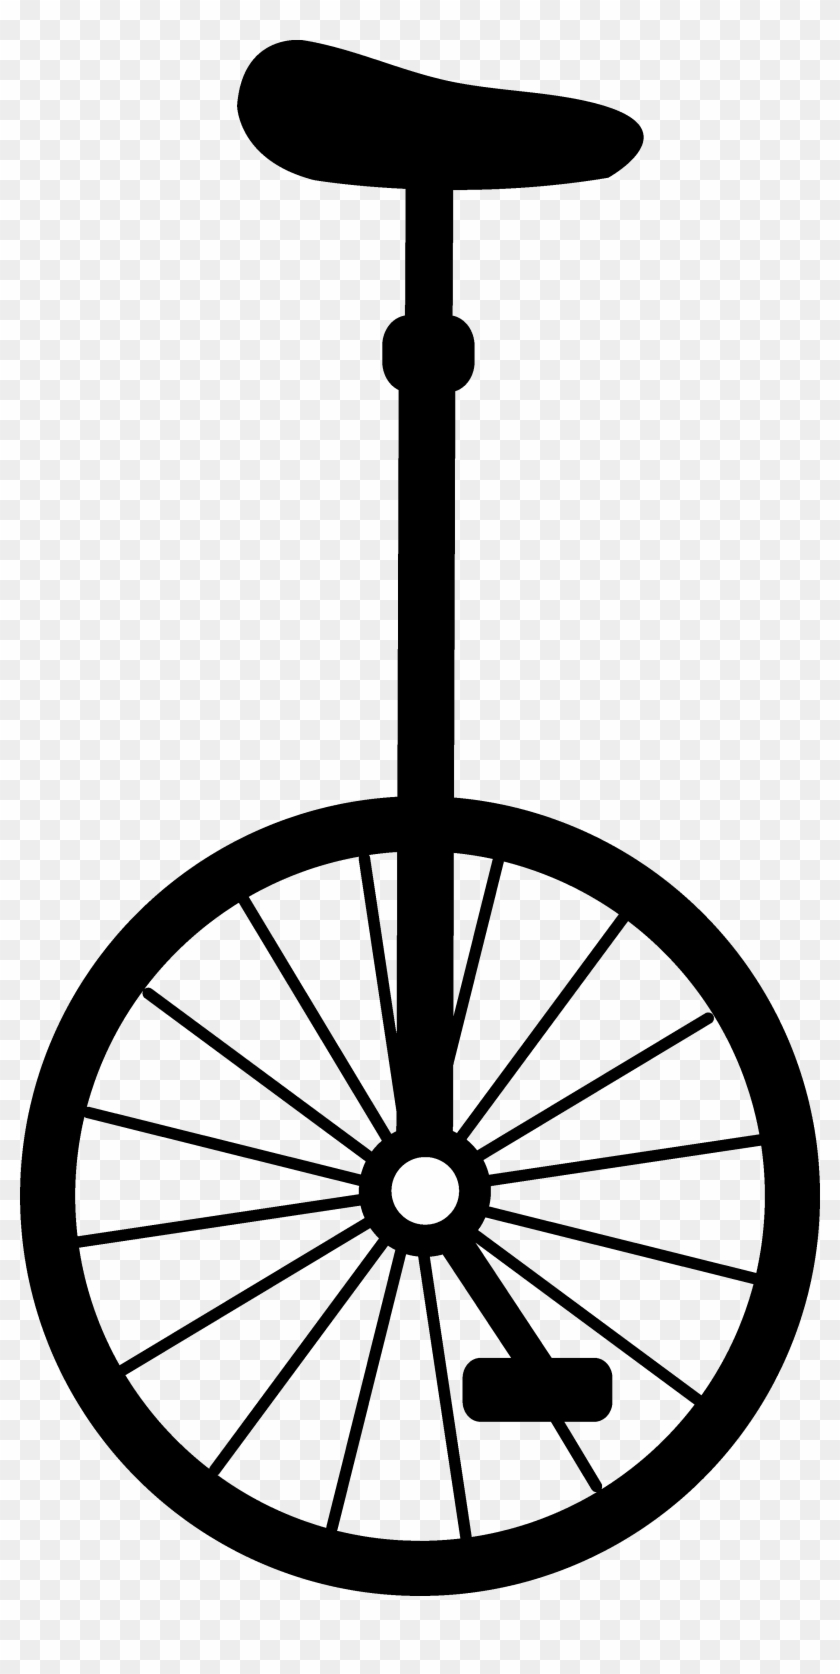 Unicycle - Clipart - Bicycle Black And White Clip Art #238045